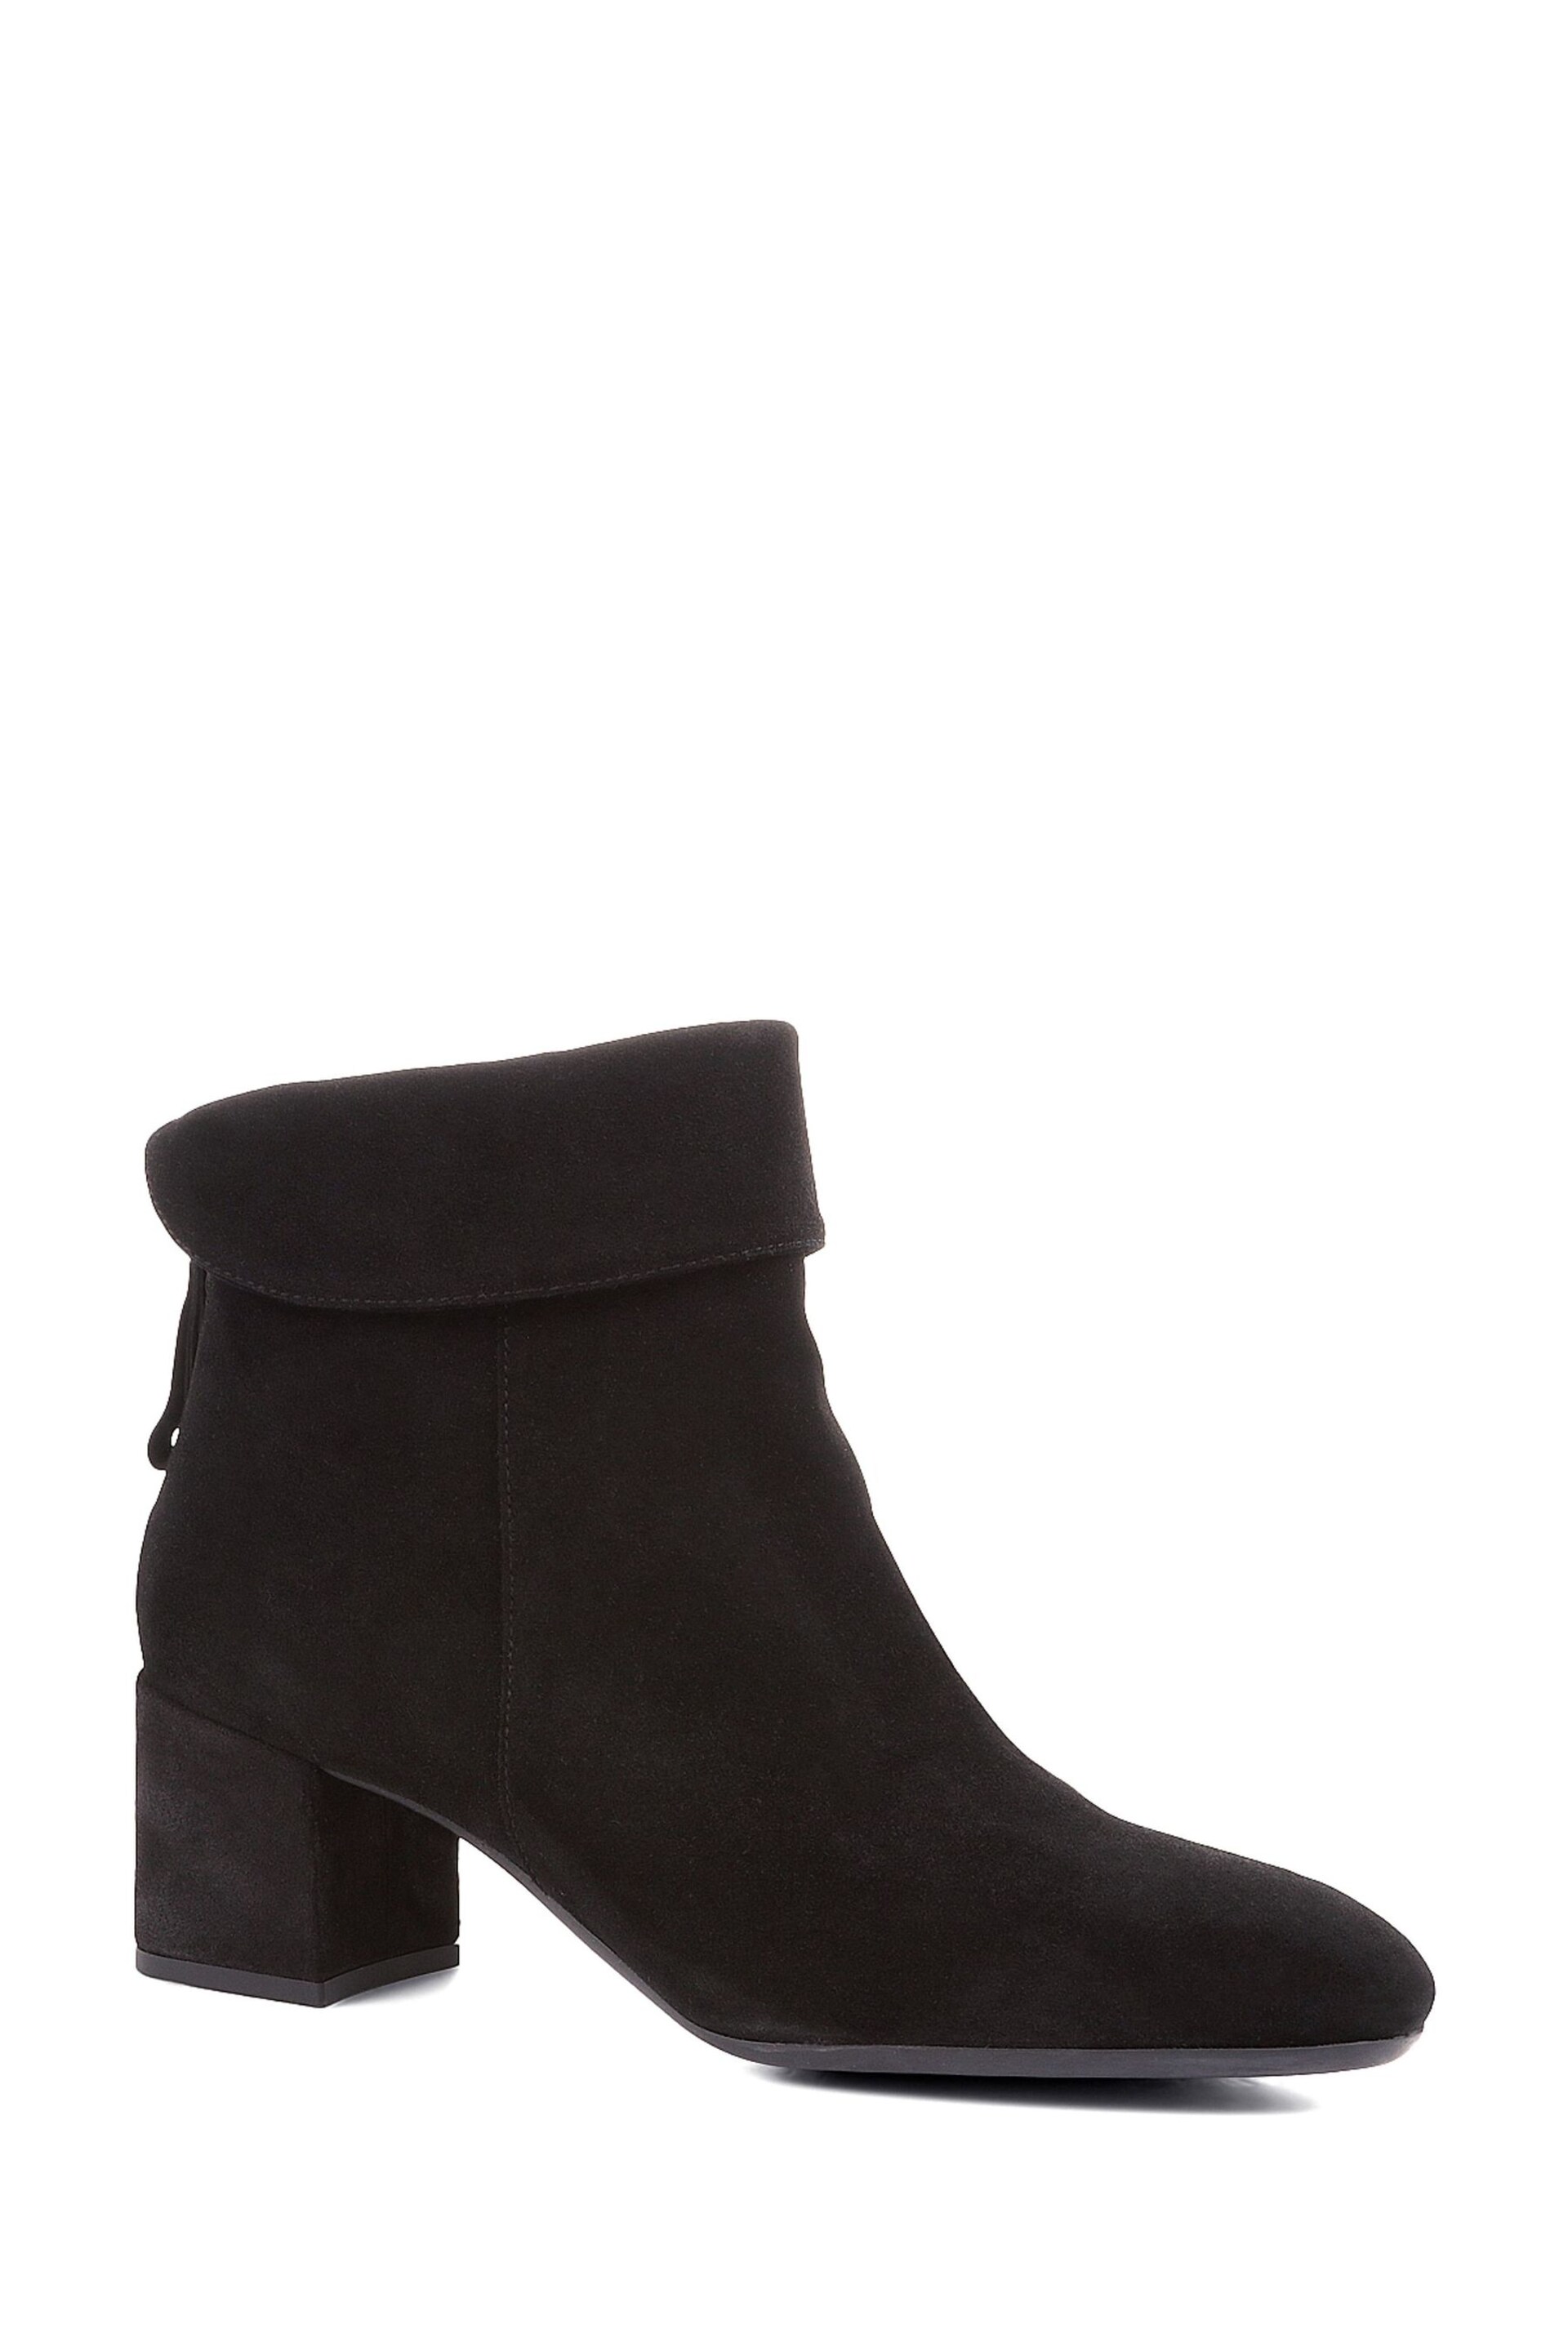 Jones Bootmaker Lylah Heeled Suede Ankle Boots - Image 3 of 6